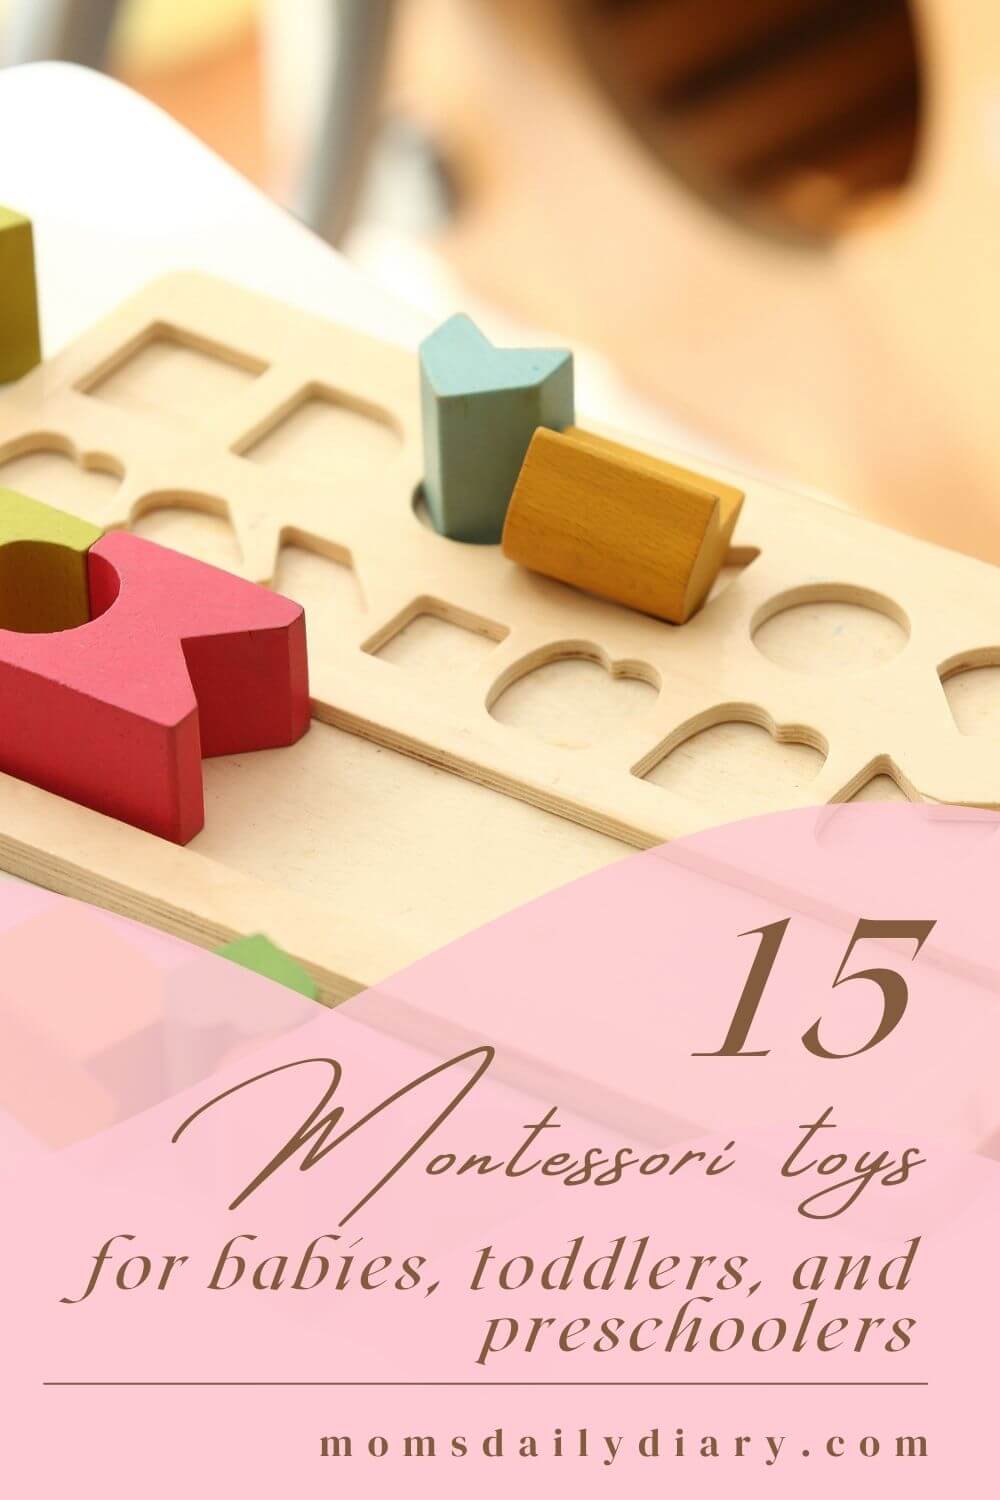 Pinterest pin with an image of a sorter and text 15 Montessori toys for babies, toddlers, and preschoolers.